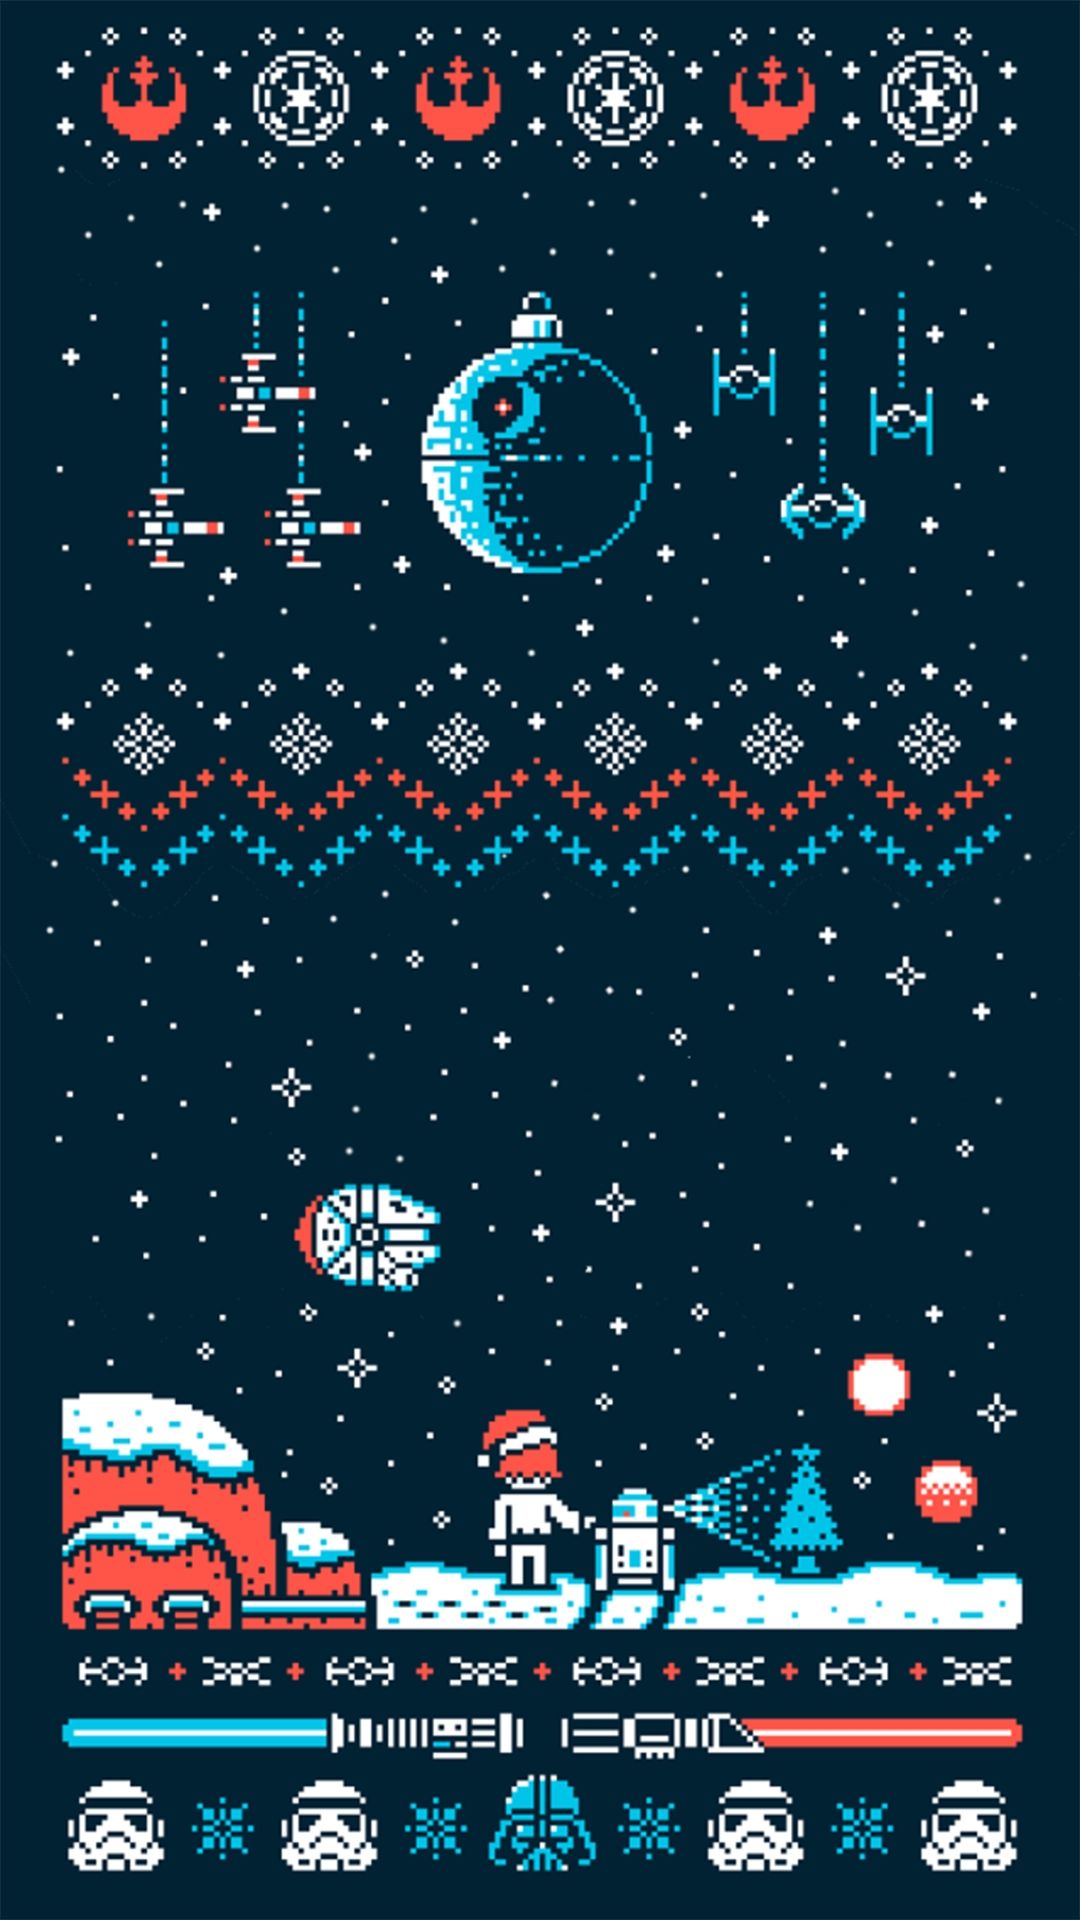 Free Christmas Wallpaper for iPhone and Vintage Background. Star wars wallpaper iphone, Star wars christmas sweater, Star wars wallpaper